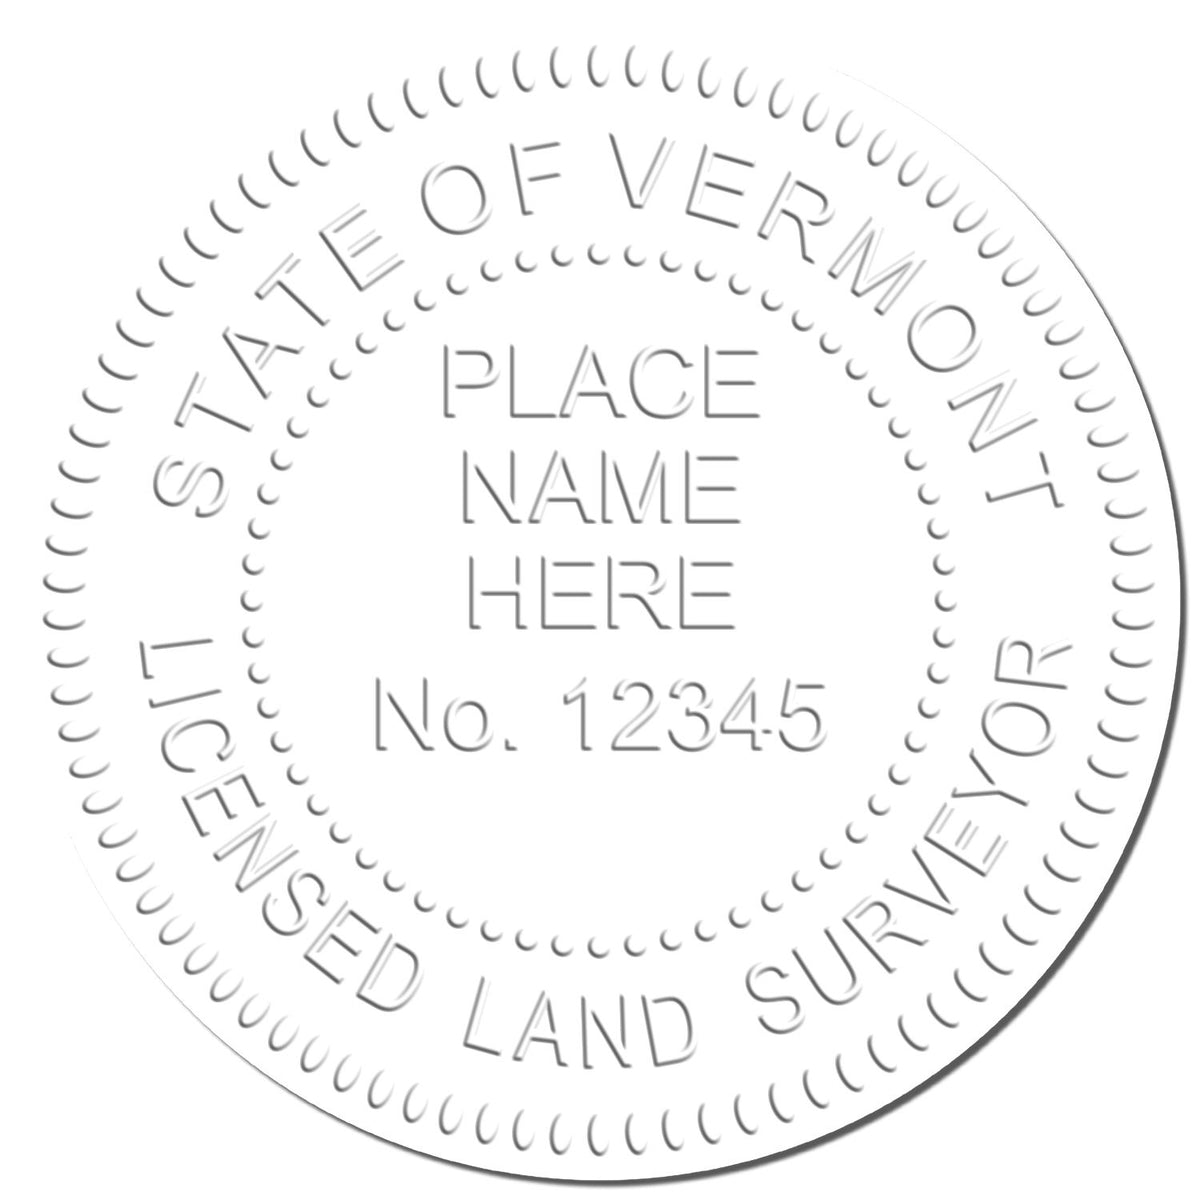 This paper is stamped with a sample imprint of the State of Vermont Soft Land Surveyor Embossing Seal, signifying its quality and reliability.